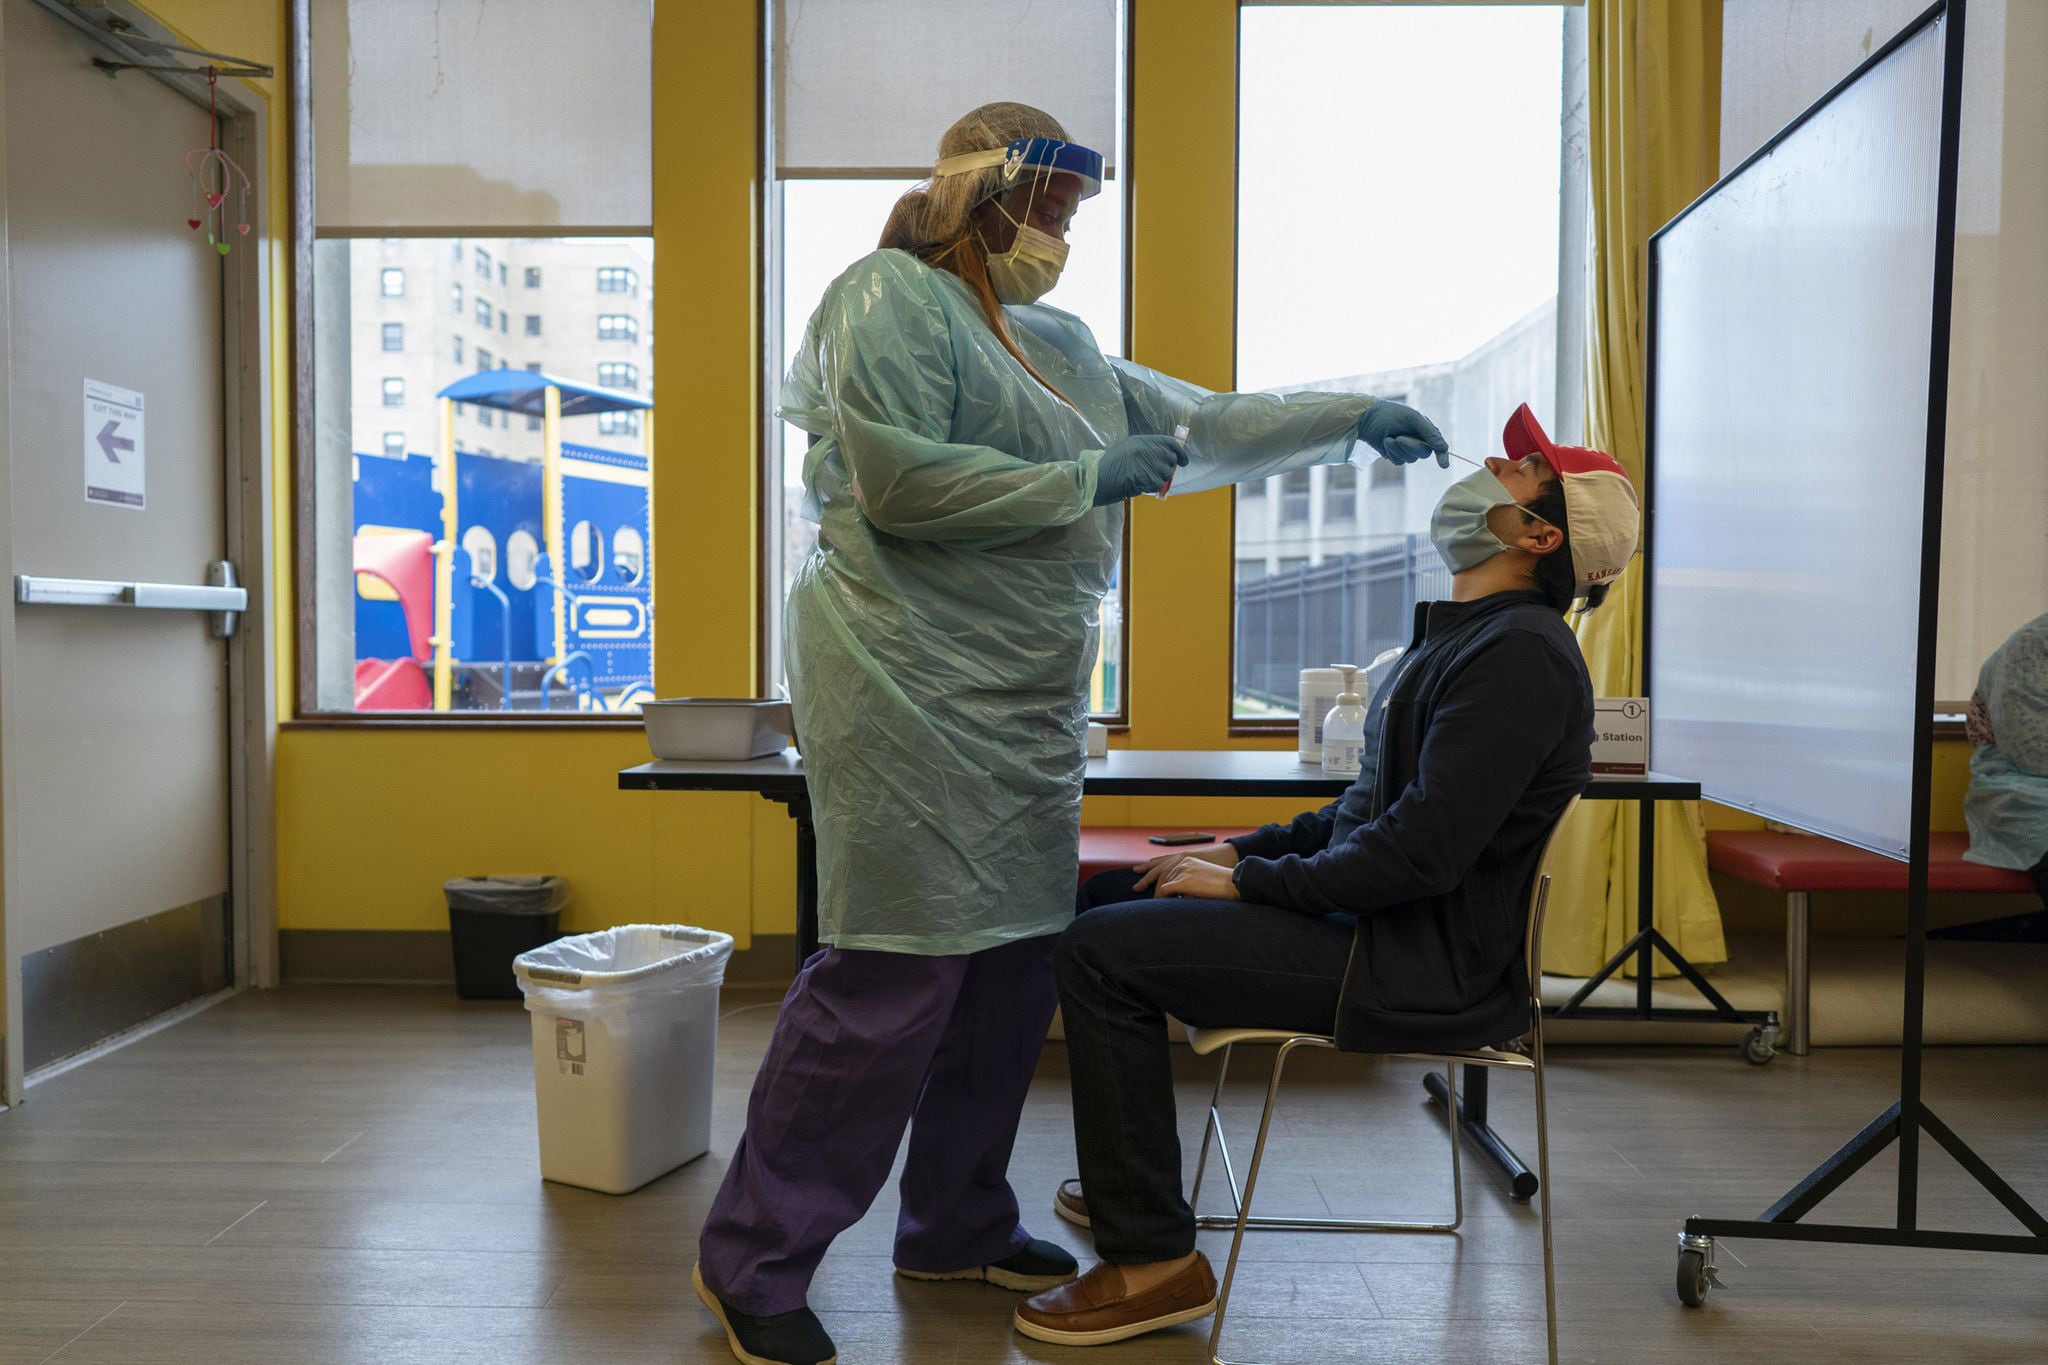 A person wearing scrubs and a face shield tests a man sitting in a chair for COVID-19.